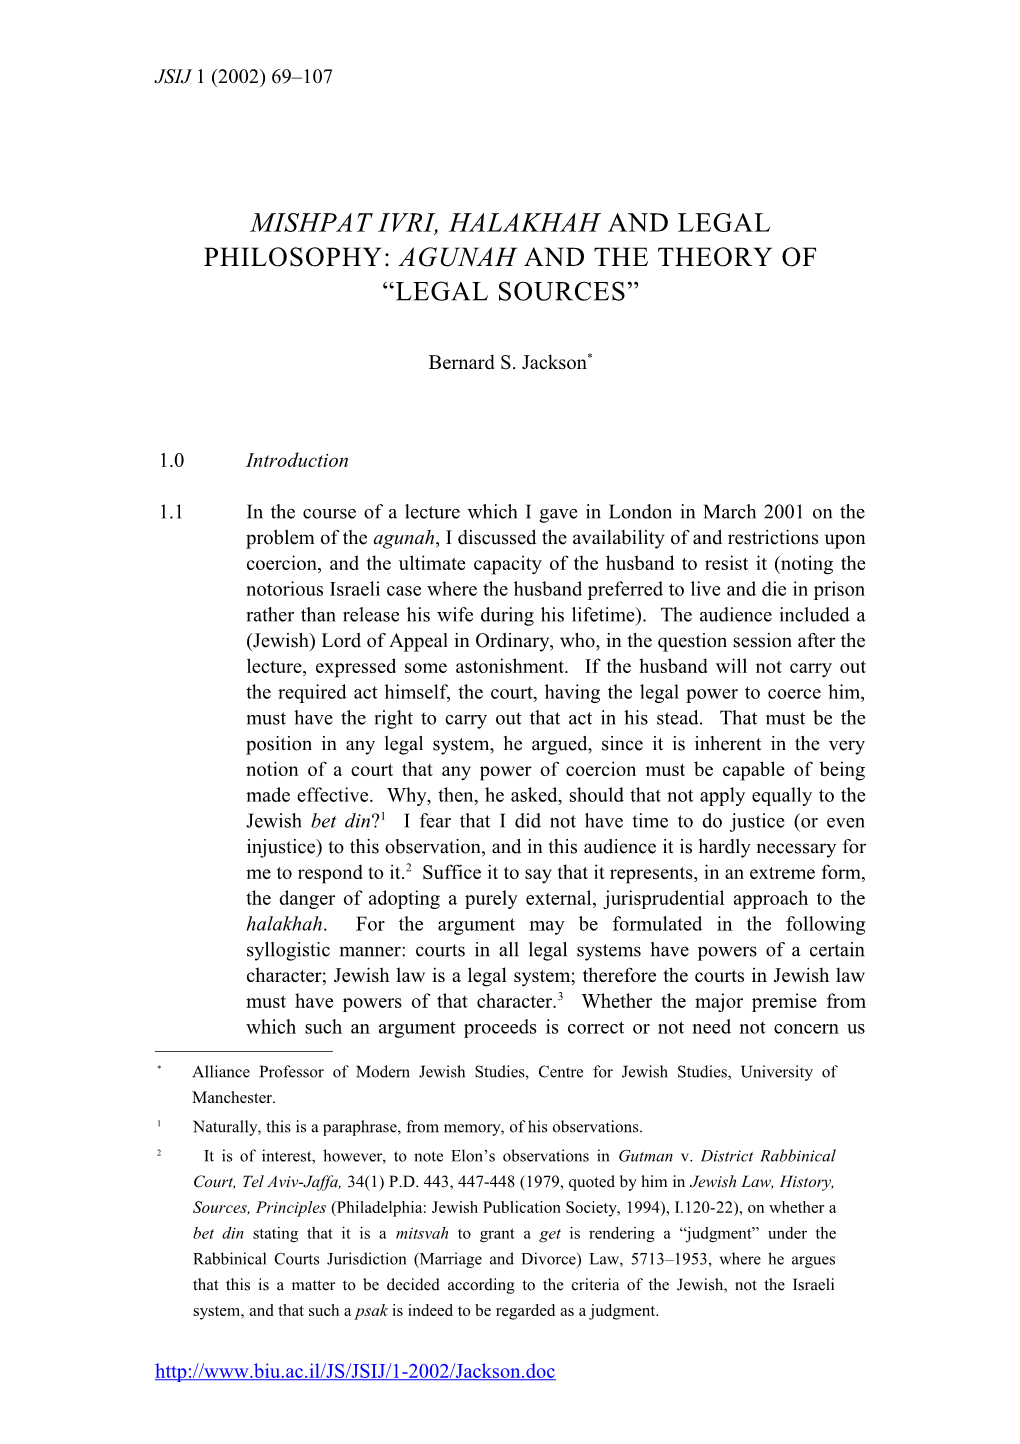 Mishpat Ivri, Halakhah and Legal Philosophy: Agunah and the Theory of Legal Sources